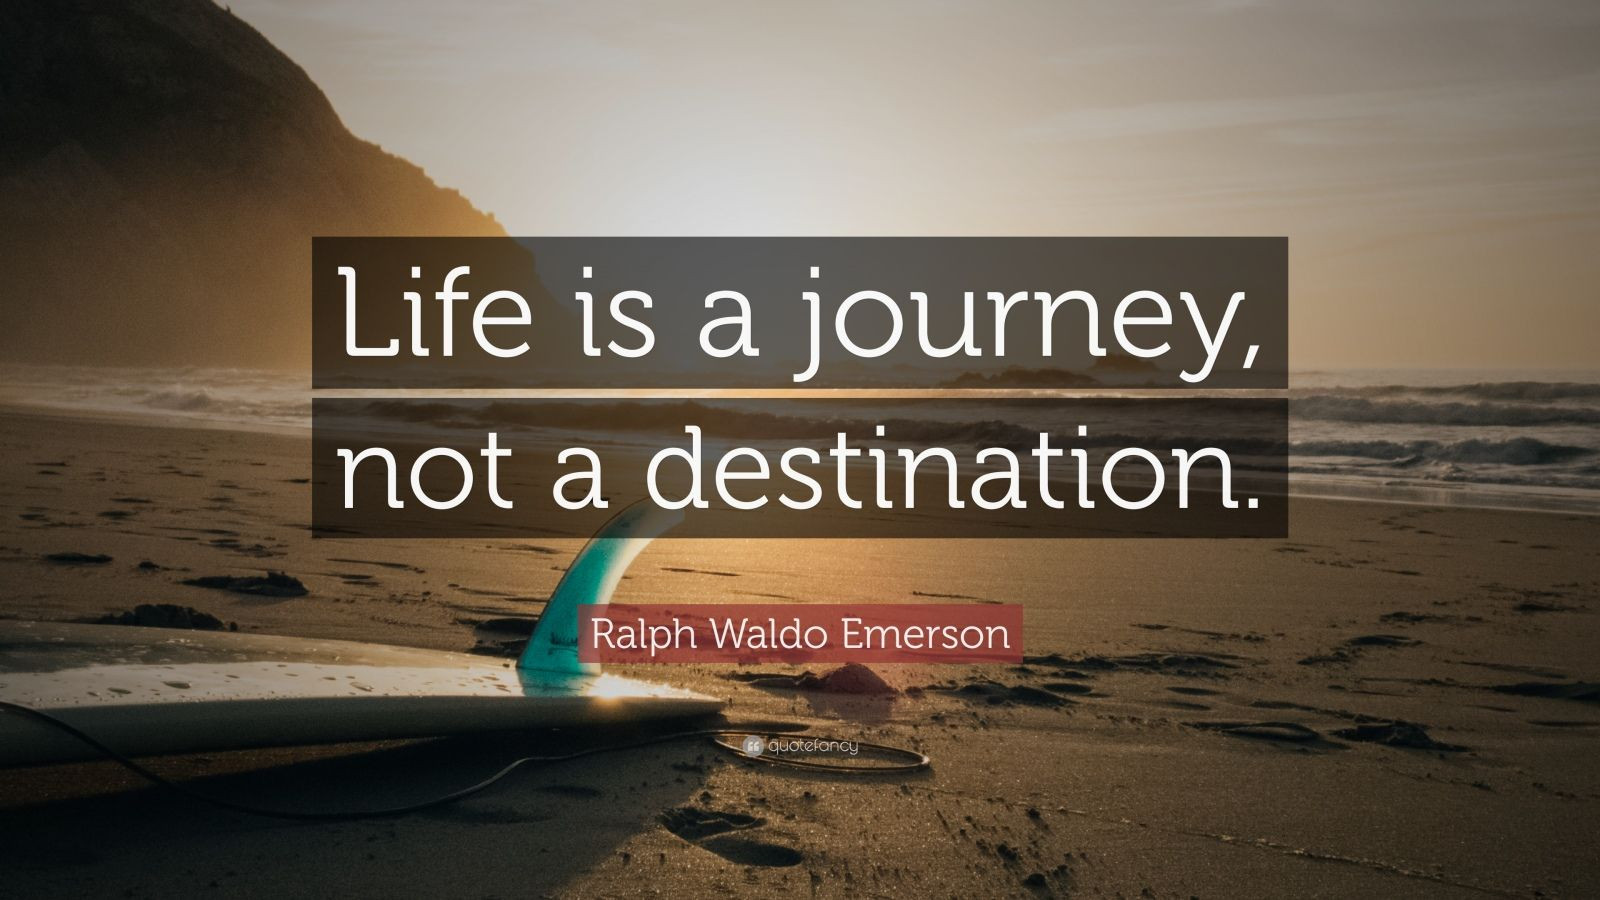 Quote About Life Journey
 Ralph Waldo Emerson Quote “Life is a journey not a